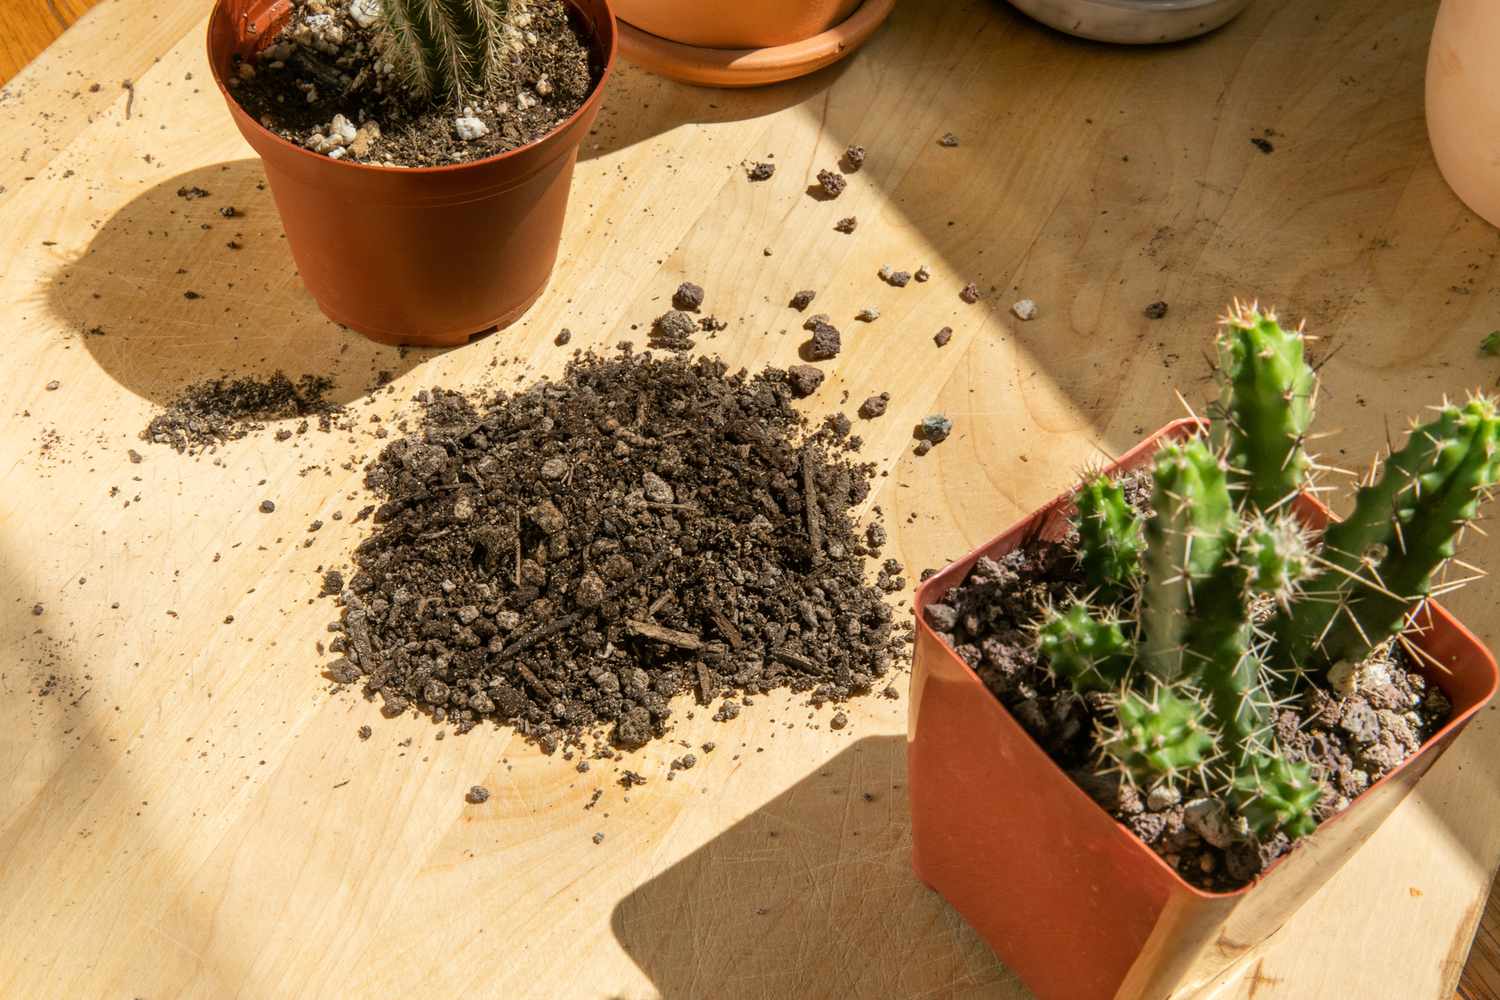 How To Make Soil Mix For Cactus